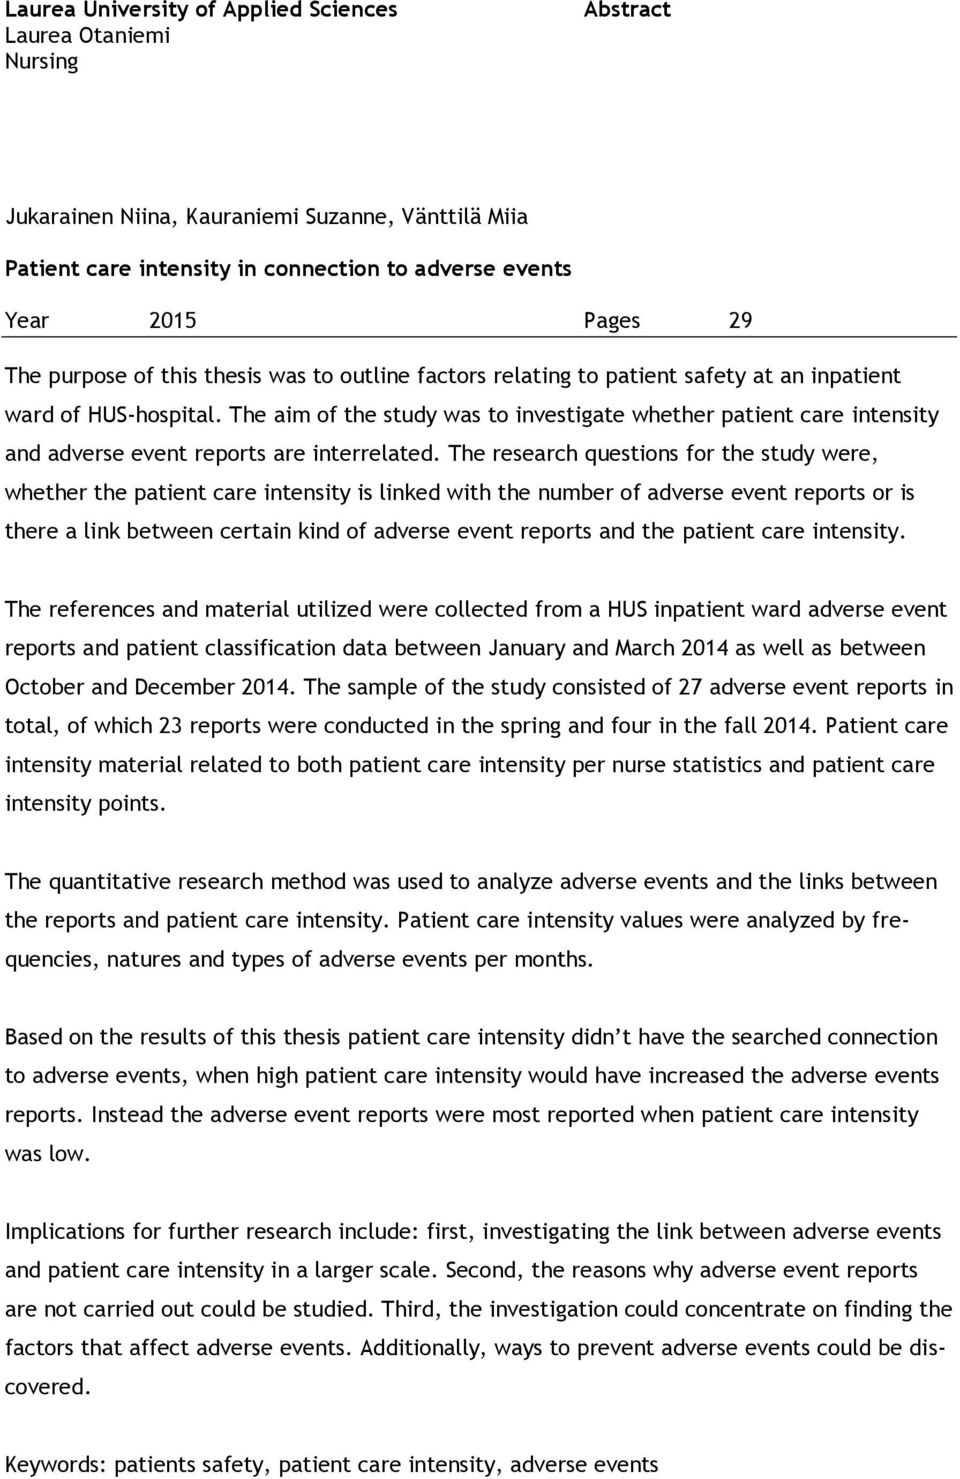 The aim of the study was to investigate whether patient care intensity and adverse event reports are interrelated.